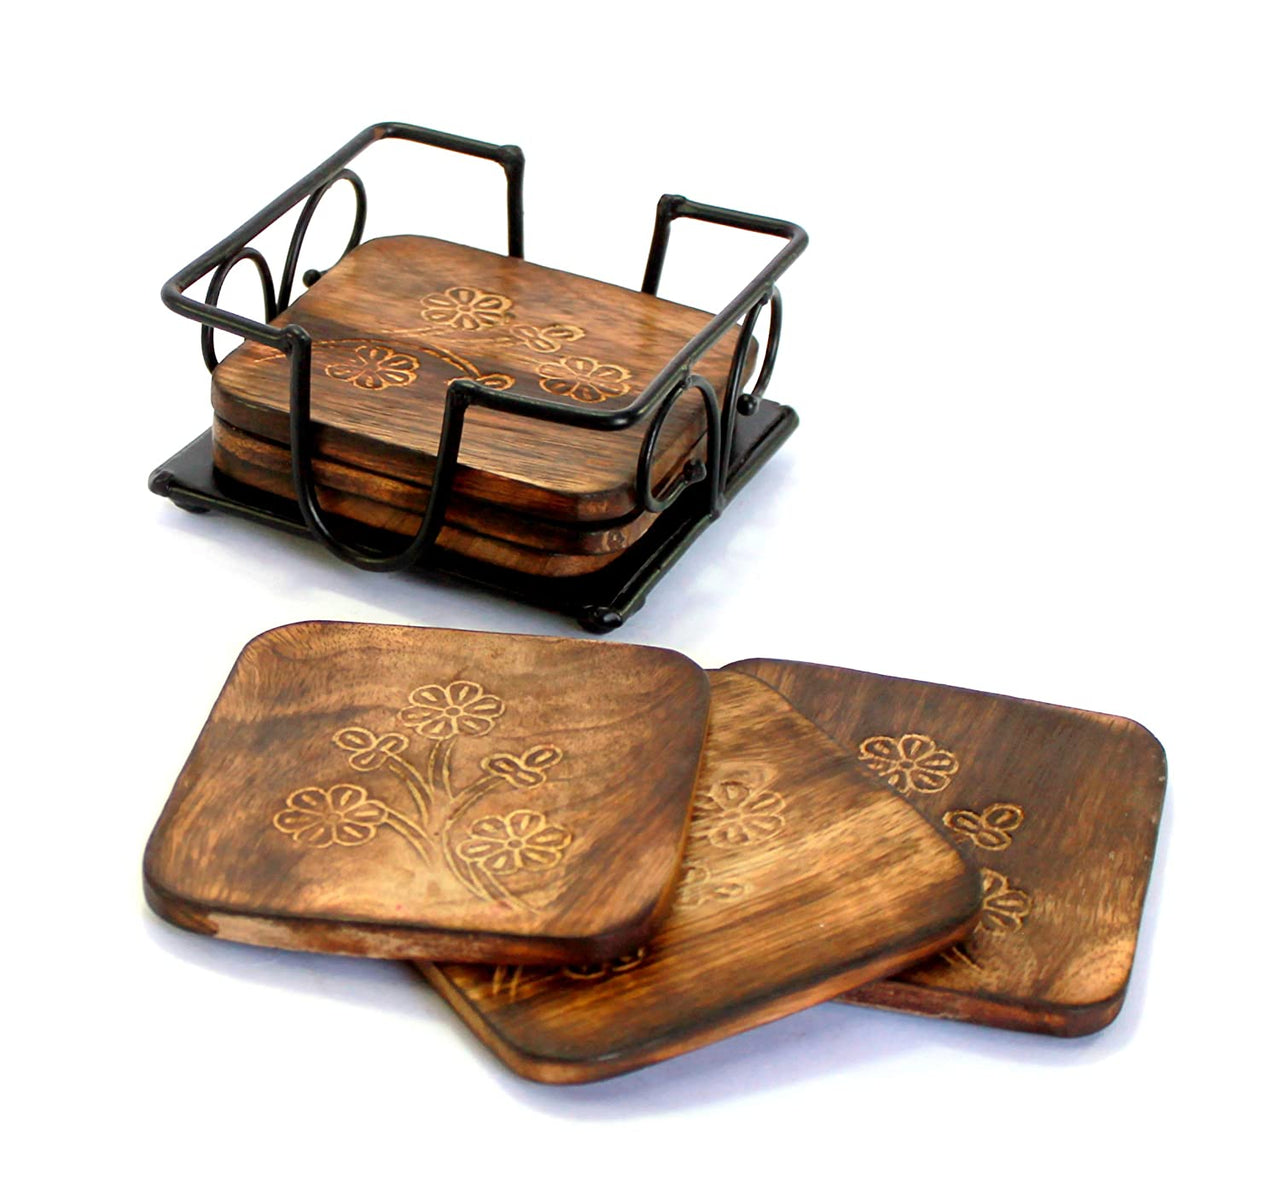 Wooden Square Shaped Mango Wood Beautiful Designed Handcrafted Wooden Tea Coaster for Tea Cups, Coffee Mugs Dime Store